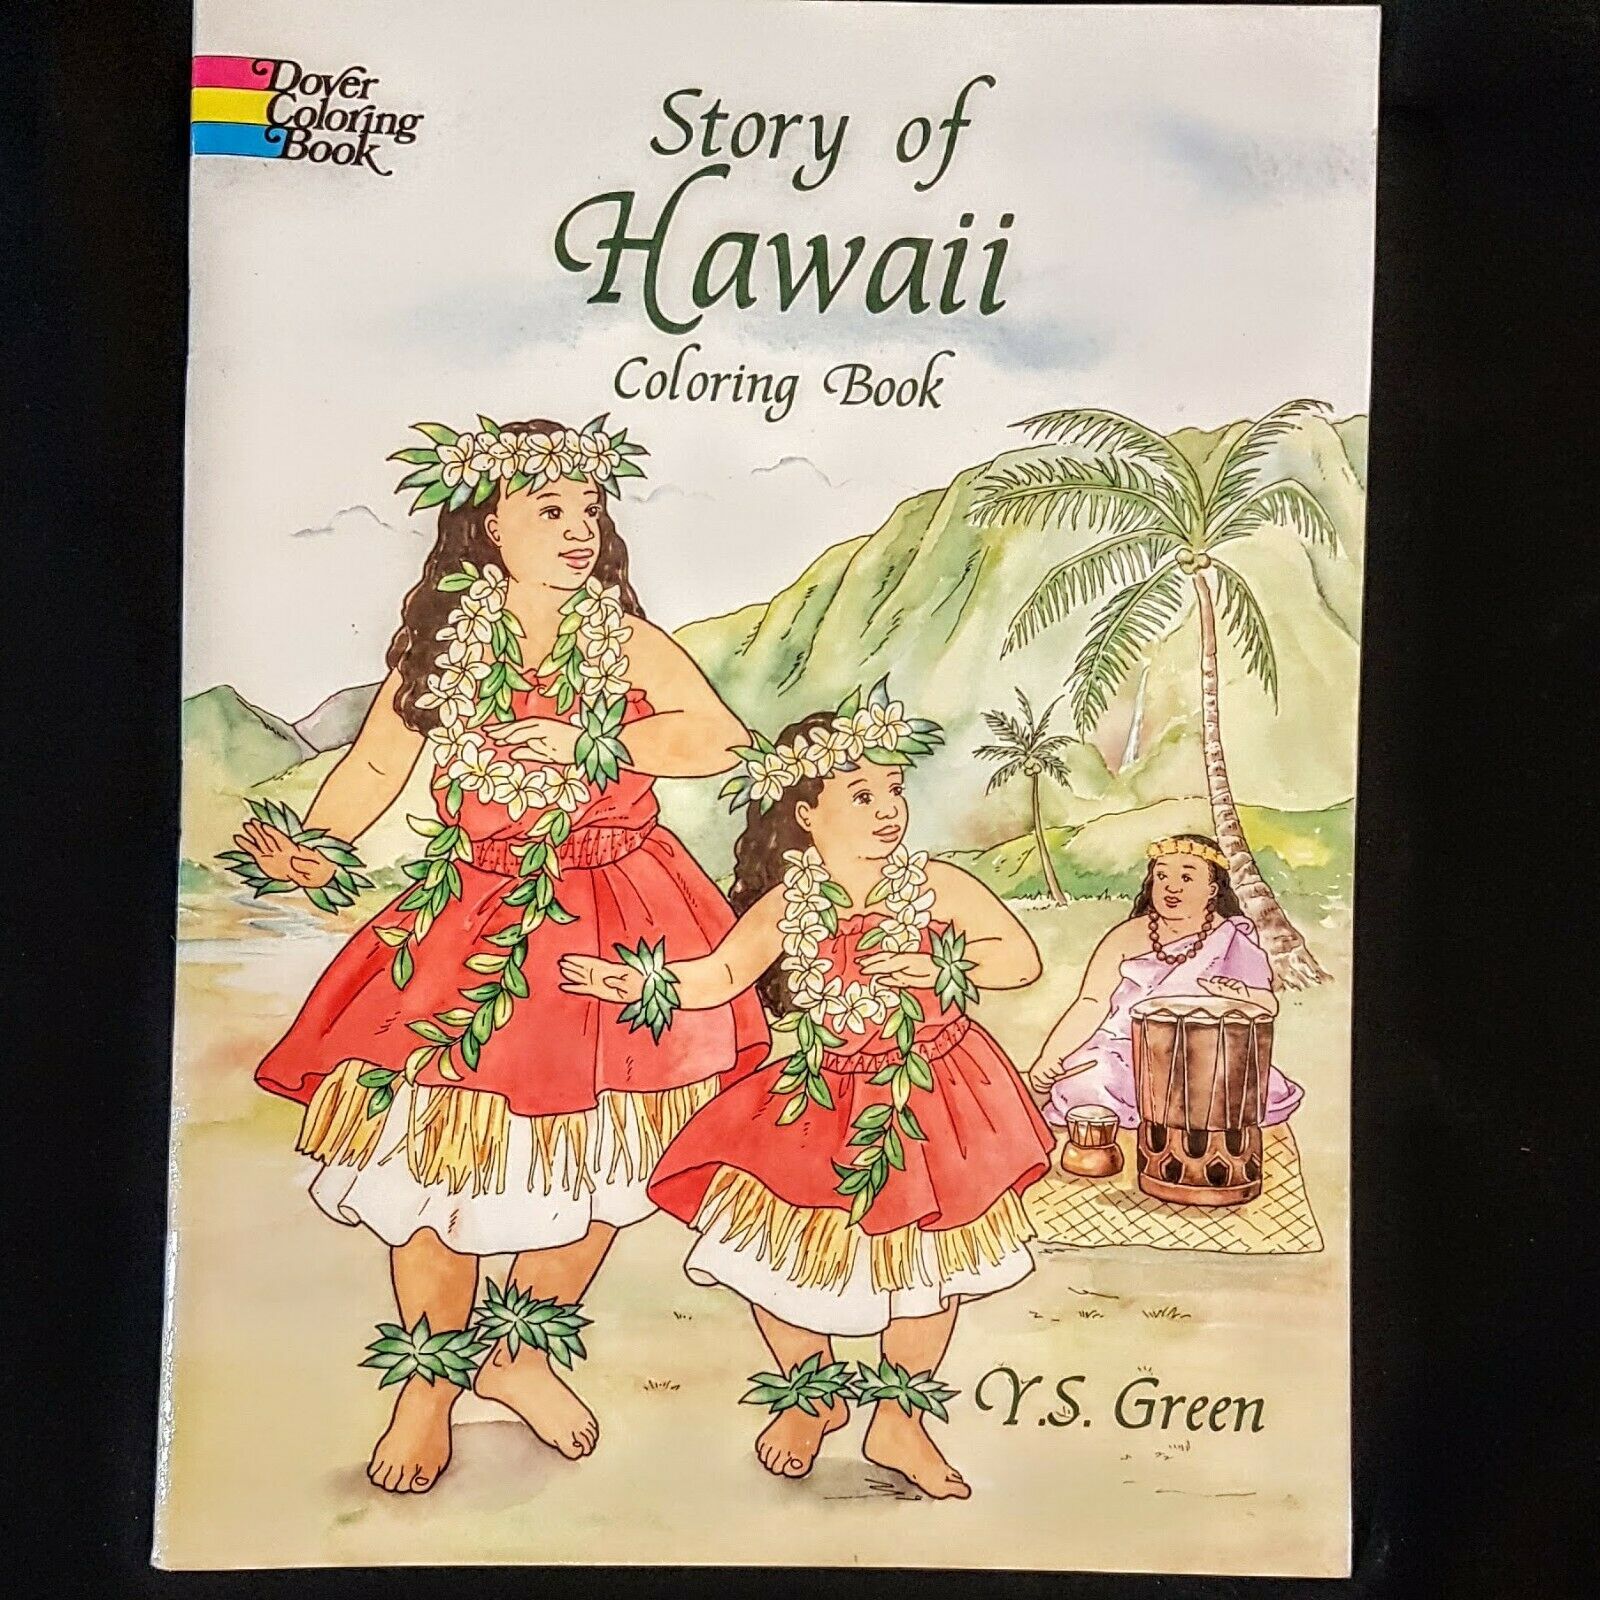 Story of Hawaii Coloring Book 1999 Dover History 8 x 11" Paperback Y S Green - $4.46